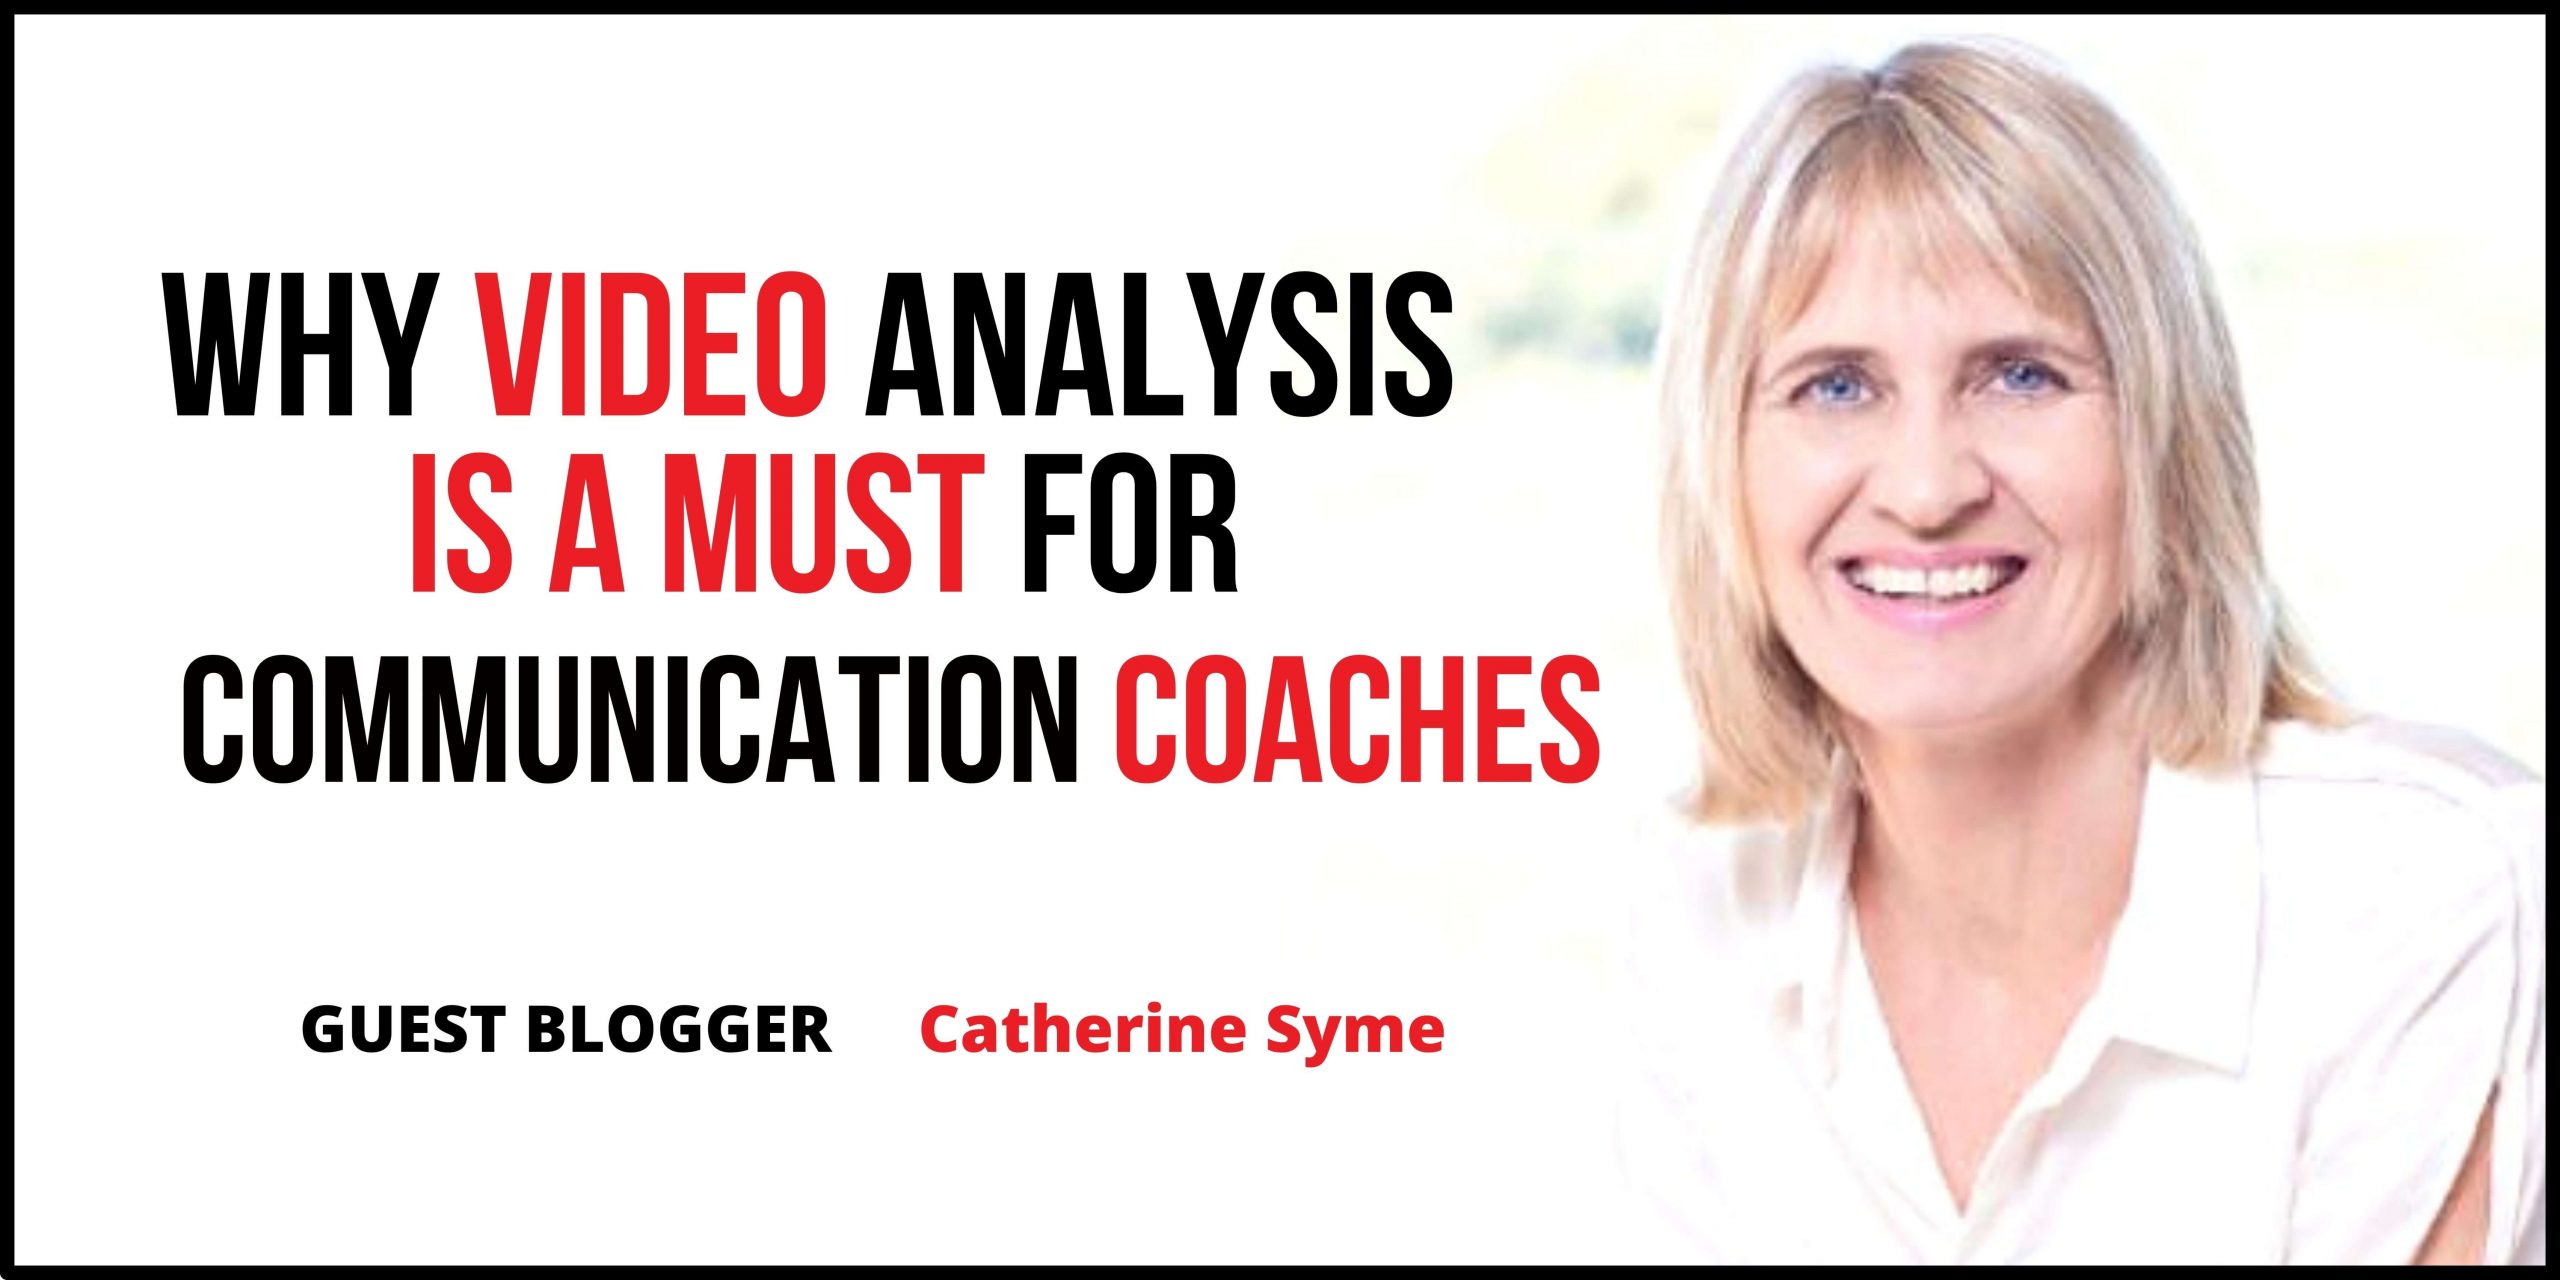 Why Video Analysis is a MUST for Communication Coaches